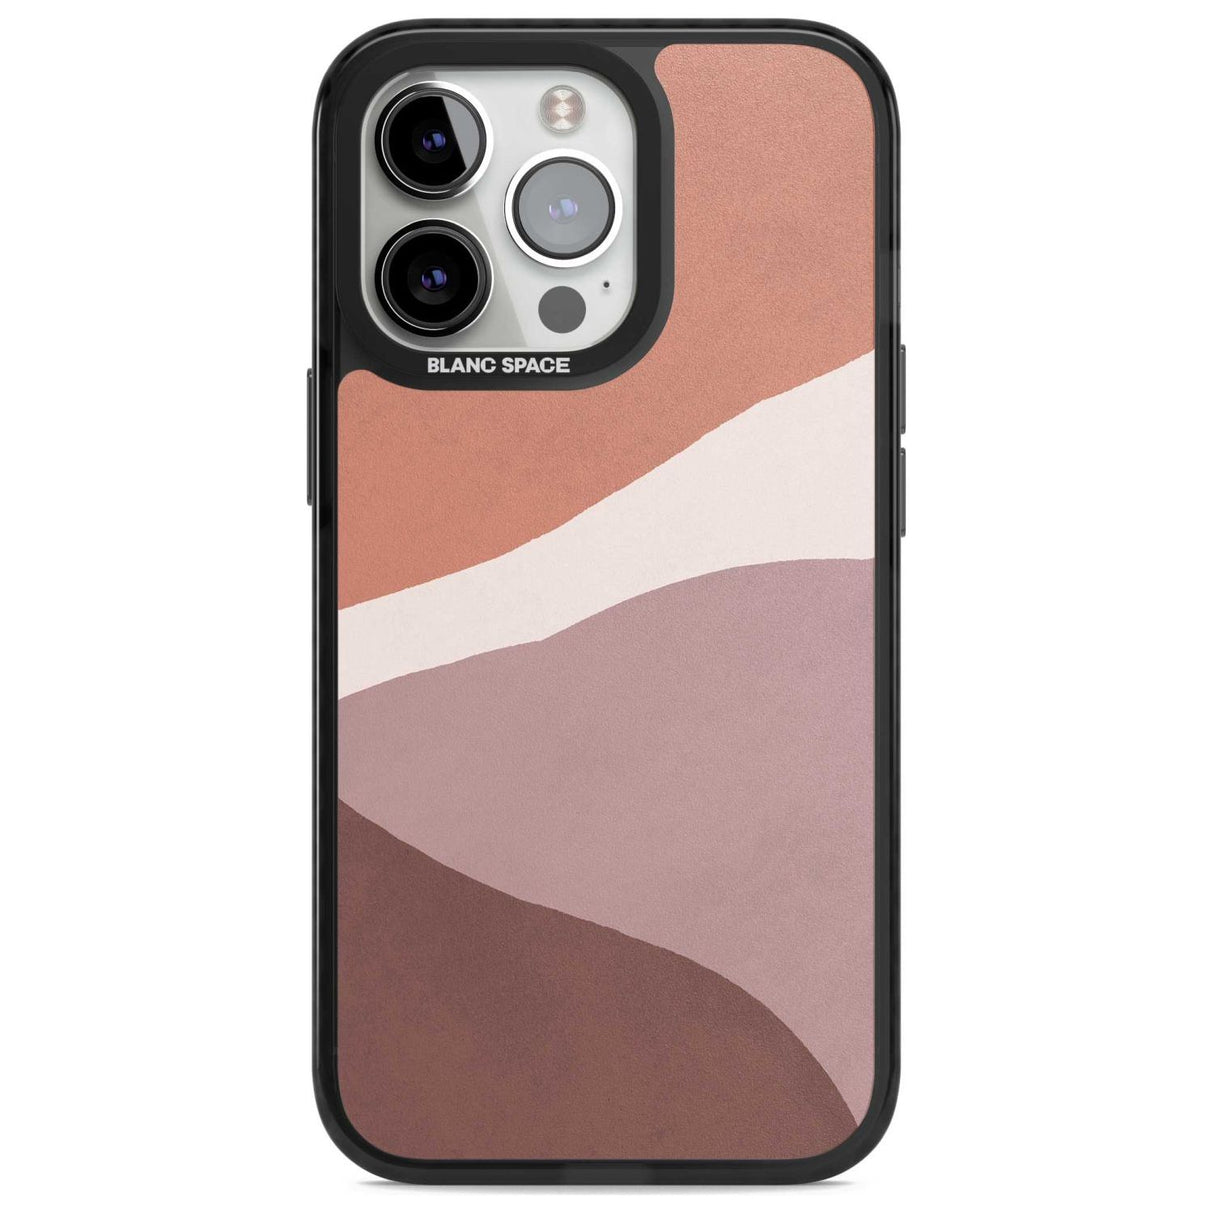 Lush Abstract Watercolour Design #2 Phone Case iPhone 15 Pro / Magsafe Black Impact Case,iPhone 15 Pro Max / Magsafe Black Impact Case,iPhone 14 Pro Max / Magsafe Black Impact Case,iPhone 13 Pro / Magsafe Black Impact Case,iPhone 14 Pro / Magsafe Black Impact Case Blanc Space